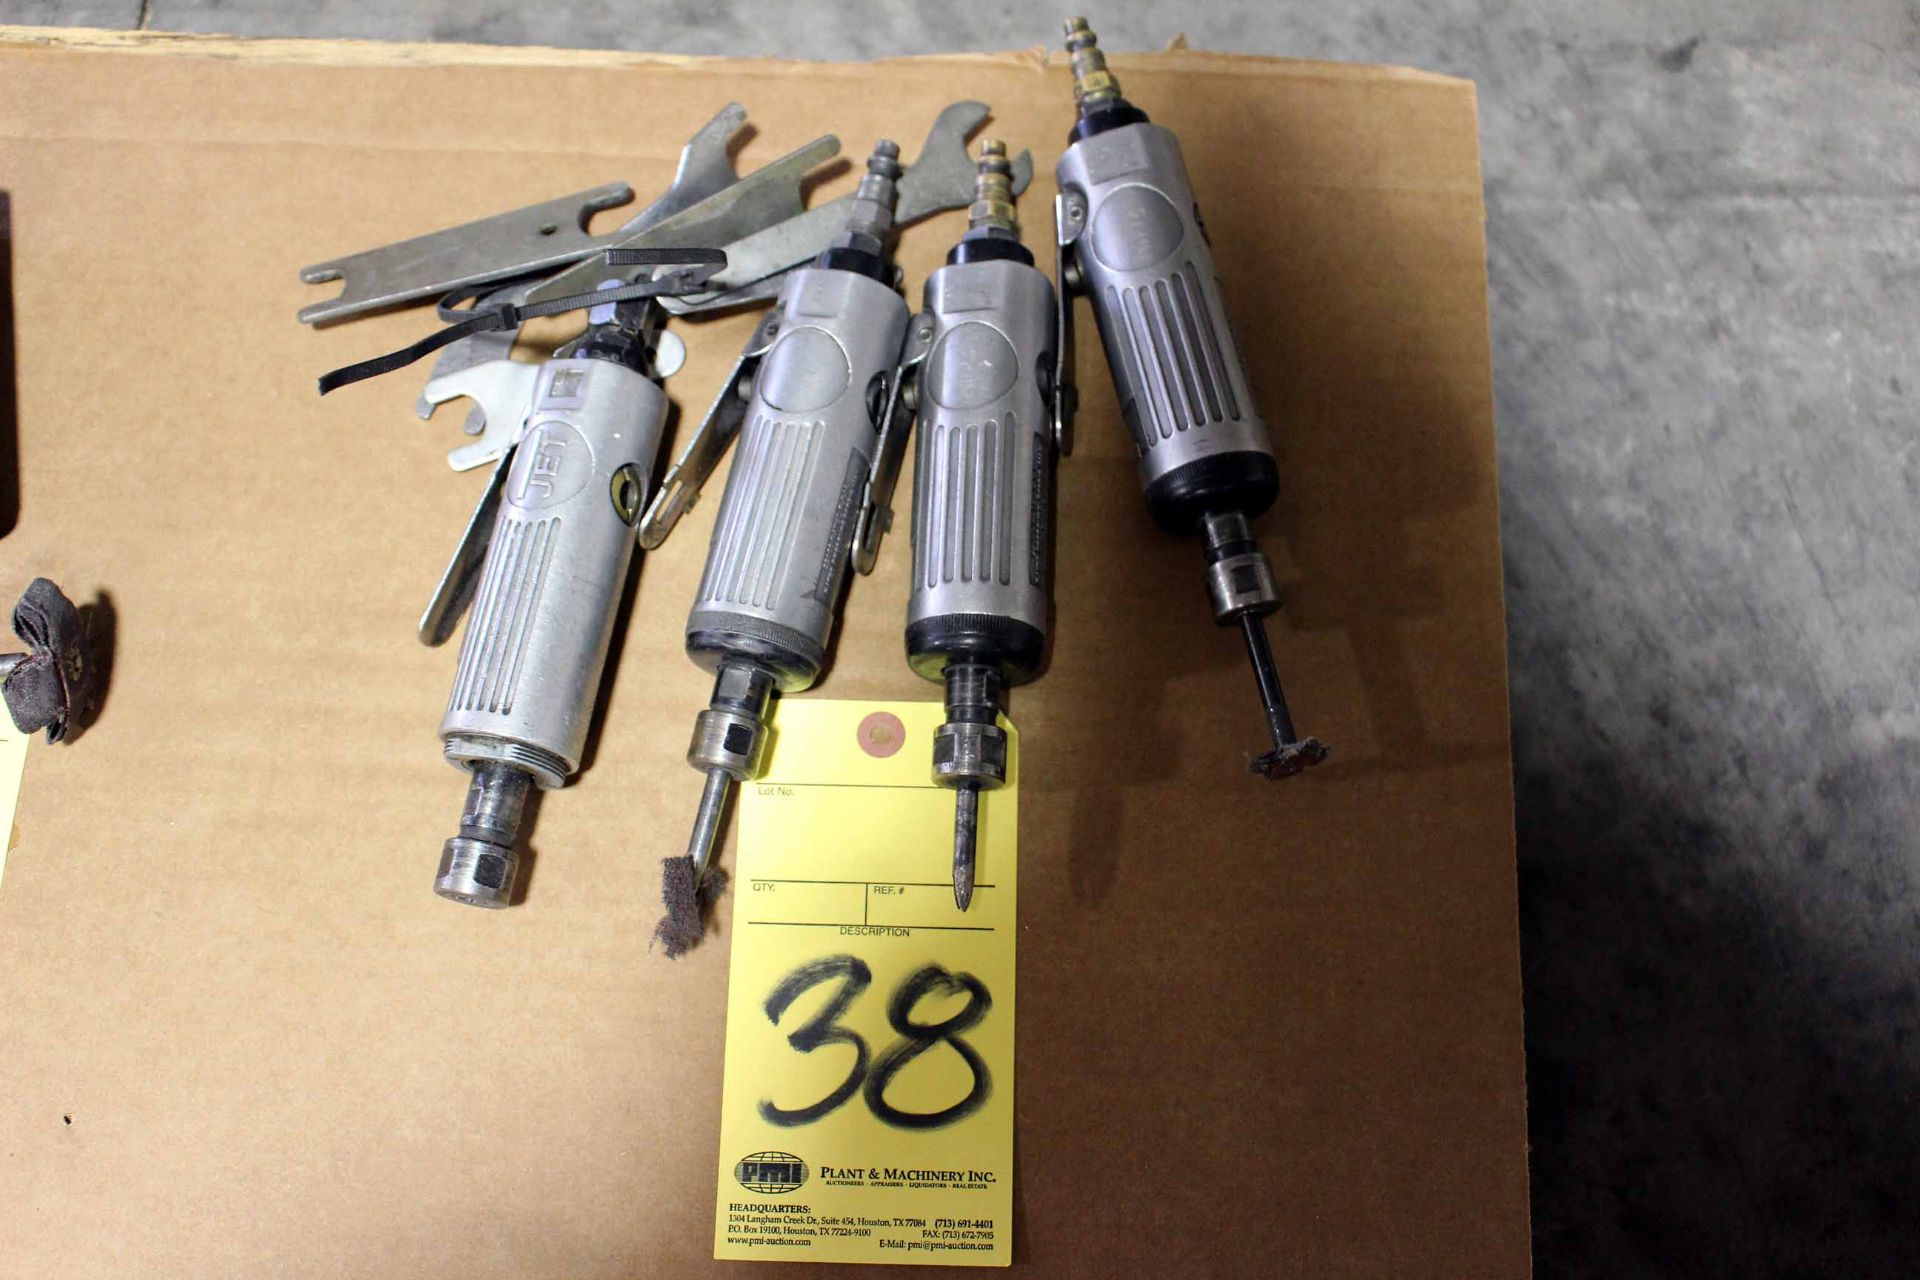 LOT OF DIE GRINDERS, PNEUMATECH (Location A)